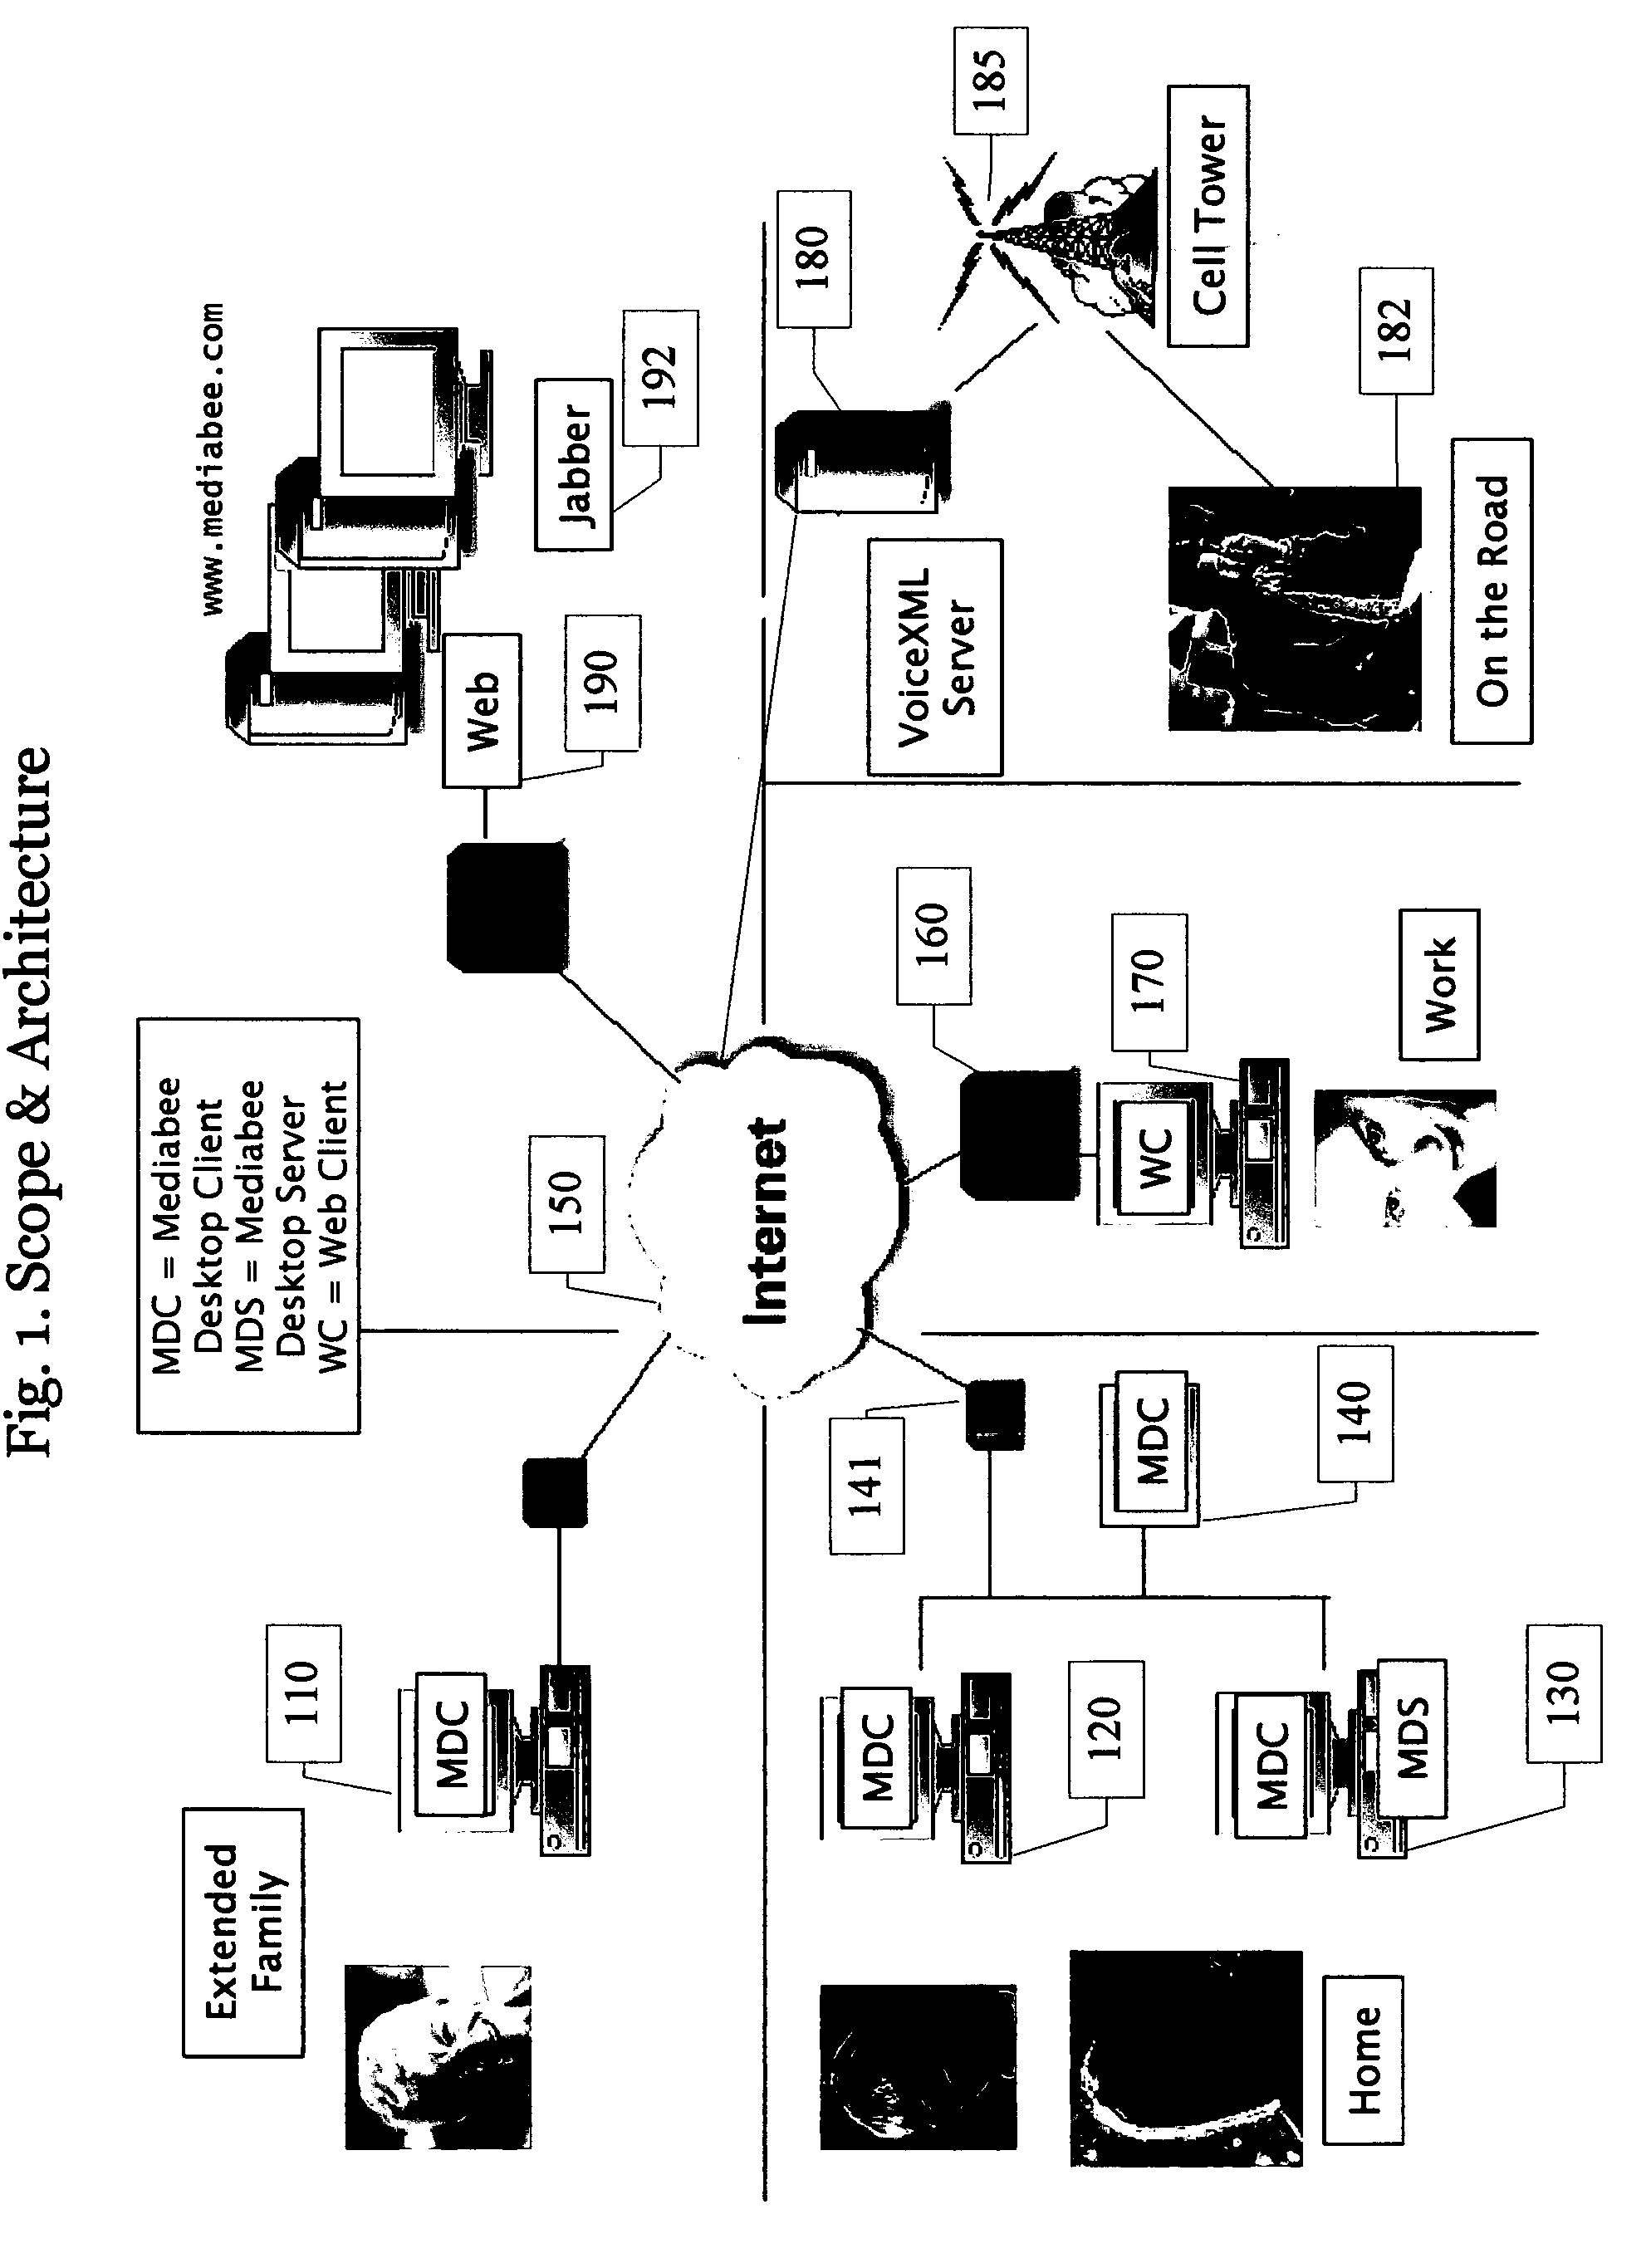 System and method for information management